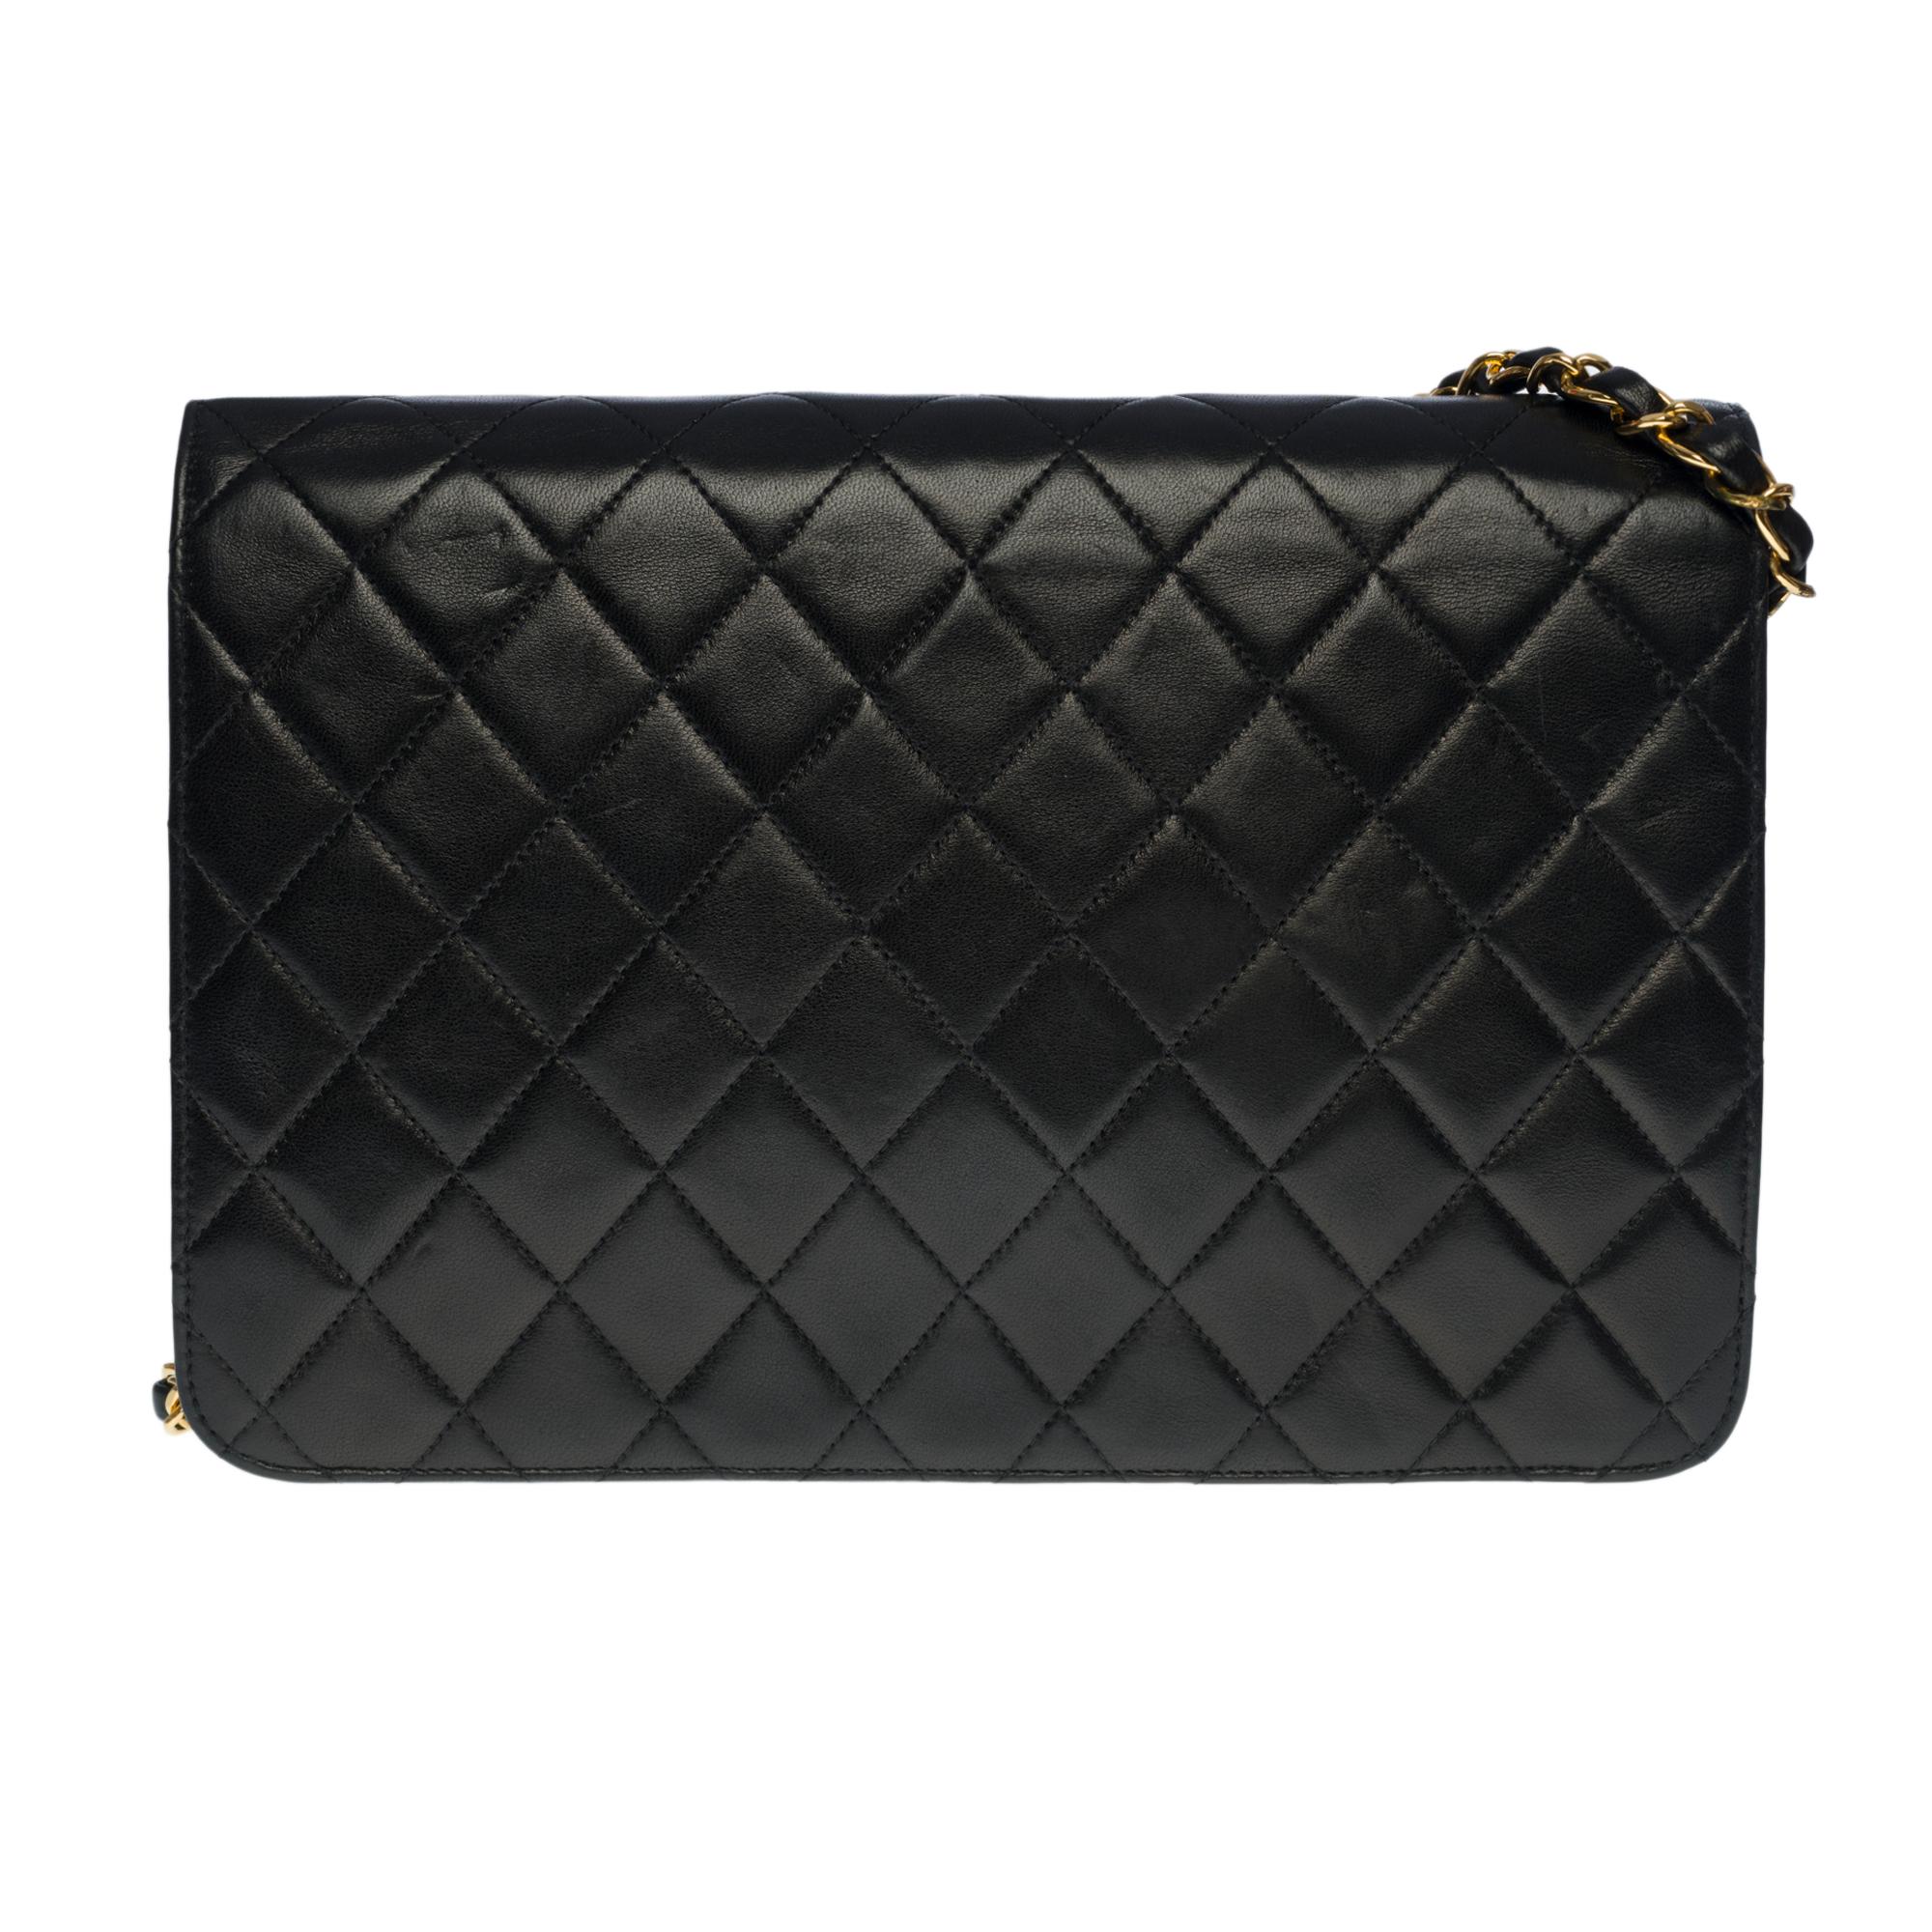 Black Amazing Chanel Classic shoulder flap bag in black quilted lambskin, GHW